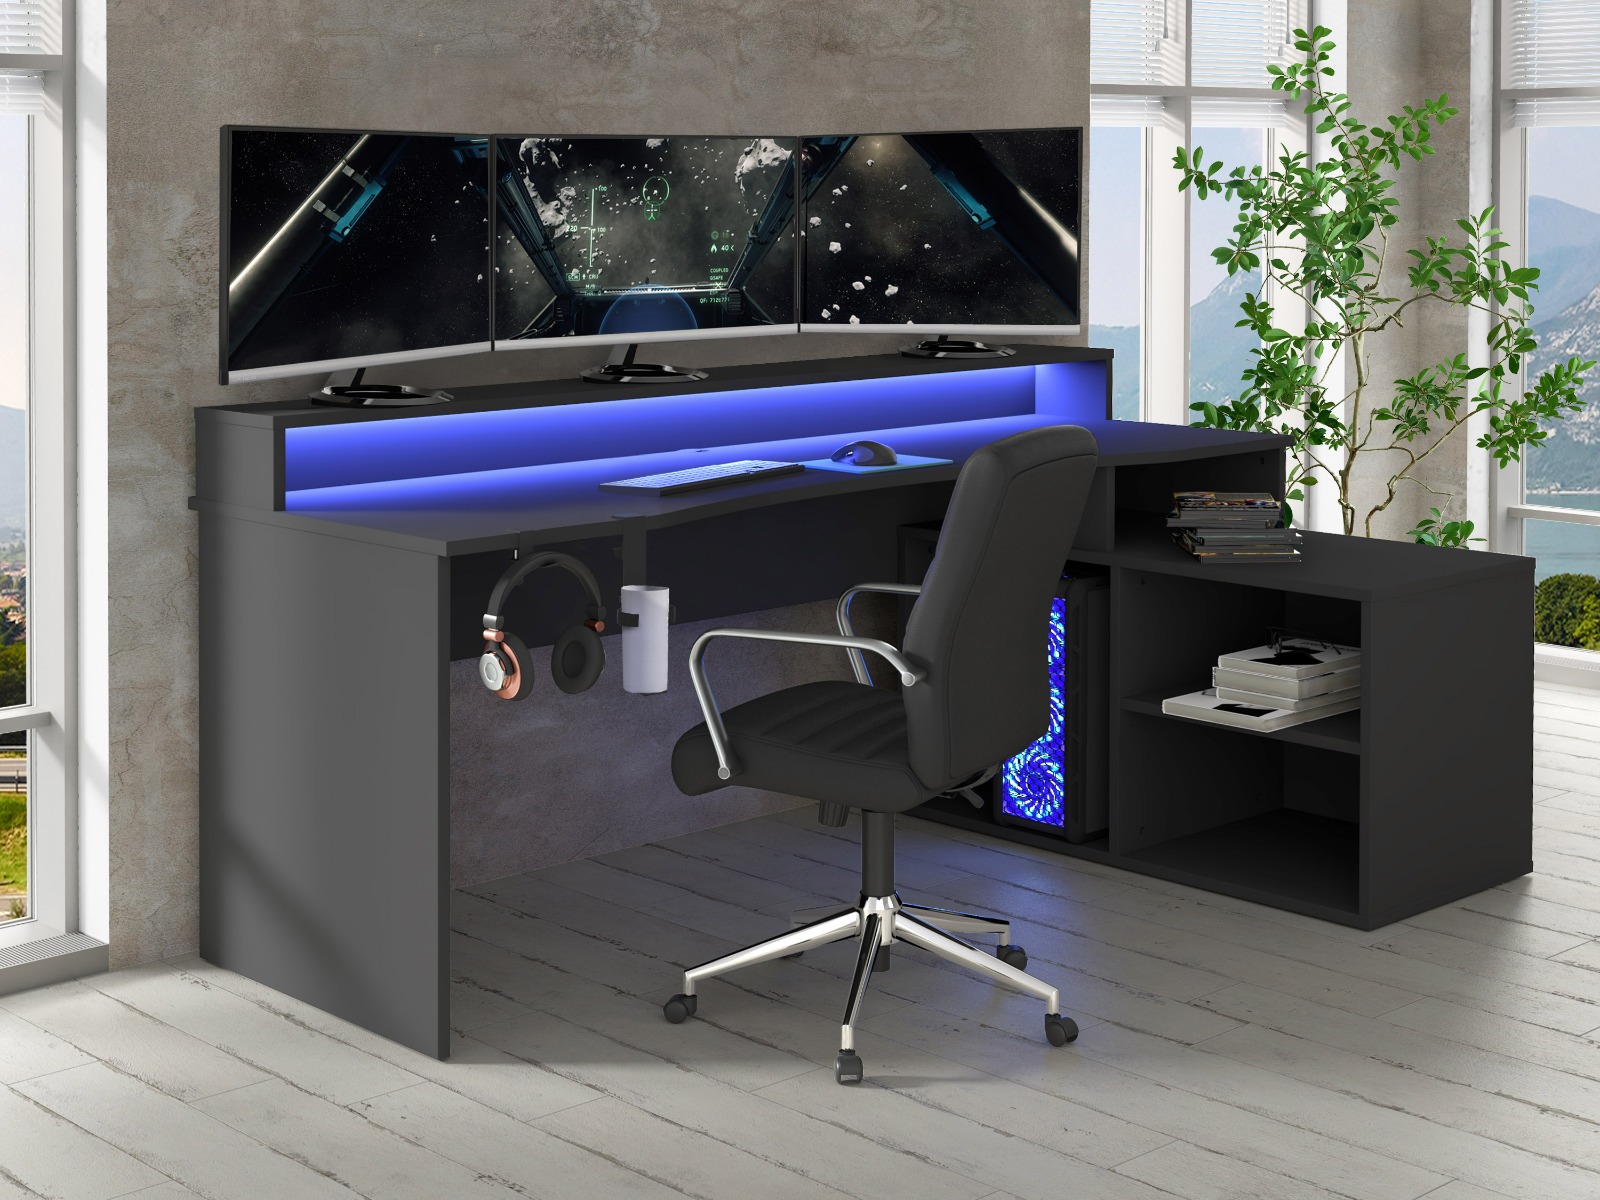 Flair Power W L Shaped Corner Gaming Desk With Colour Changing LED Lights